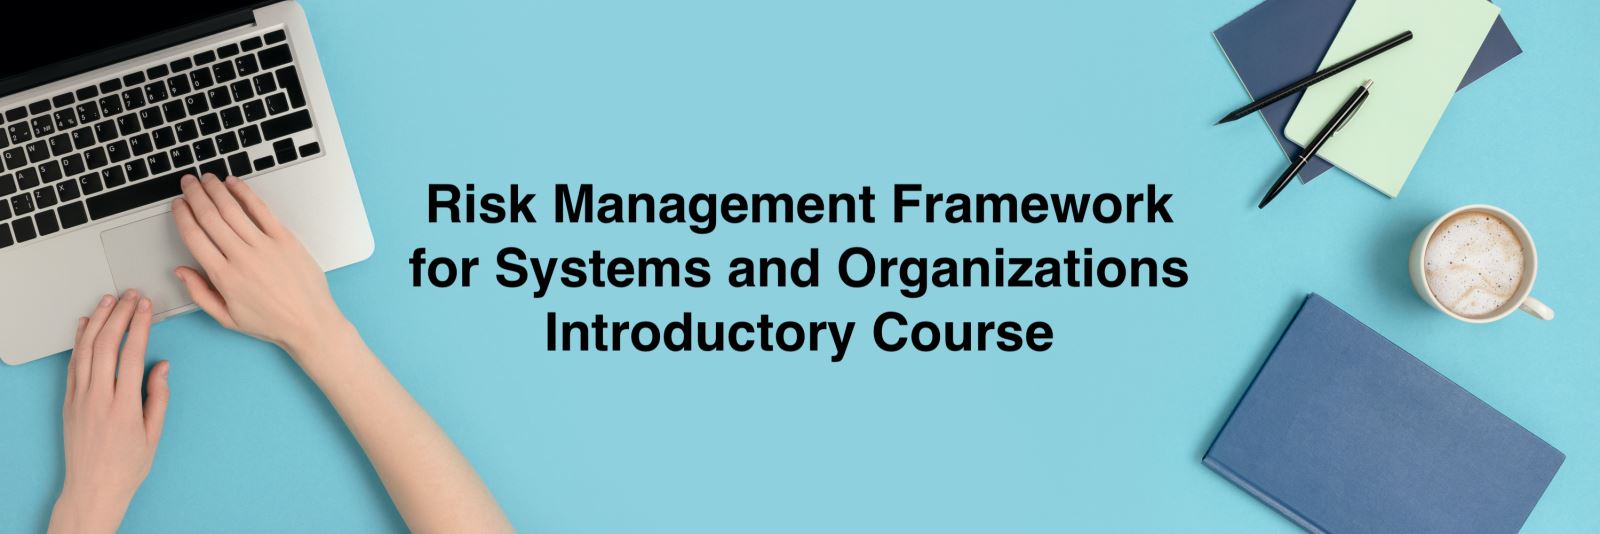 RMF Introductory Course